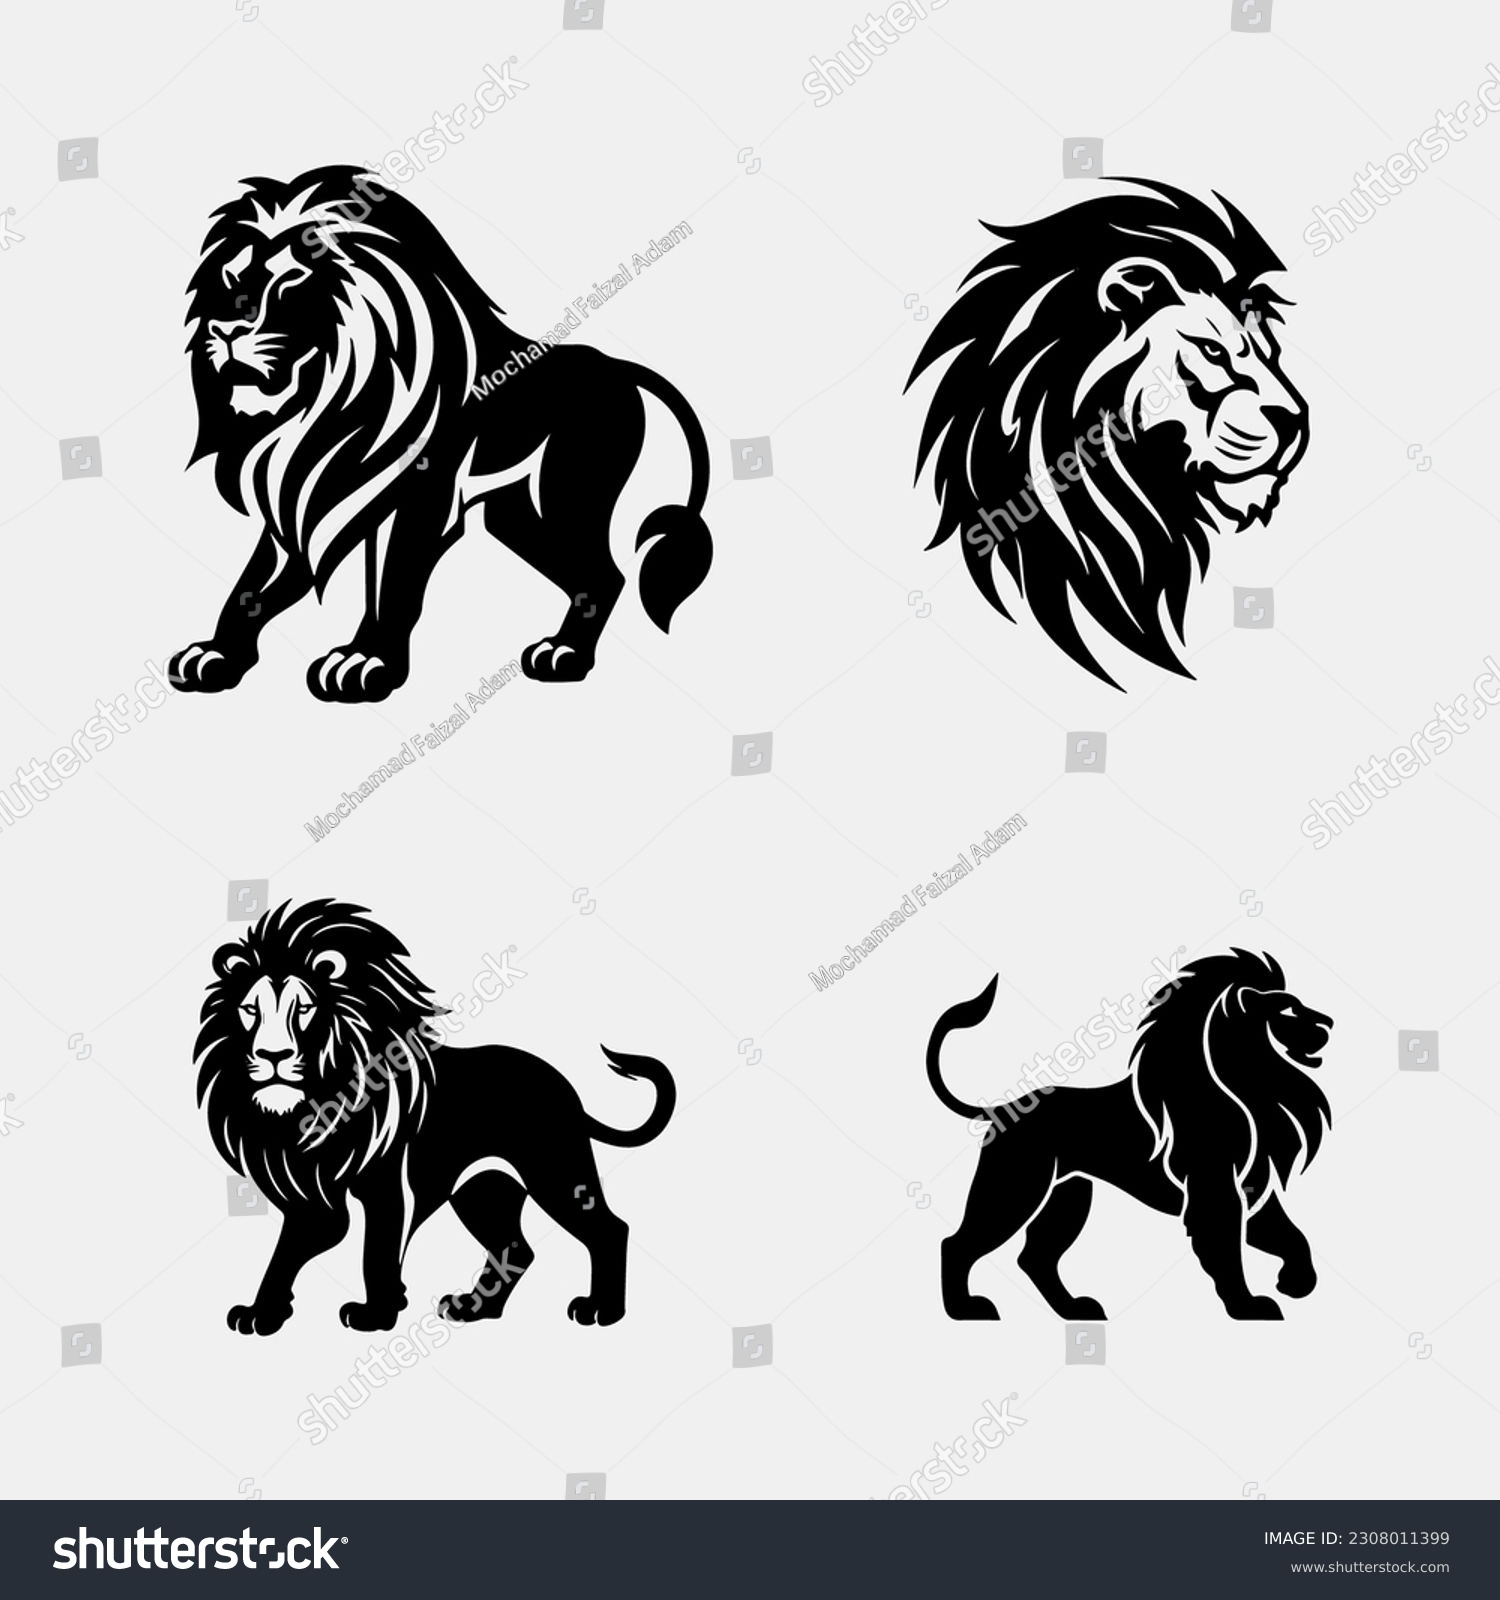 SVG of lion silhouettes set vector illustration lion isolated on white background svg